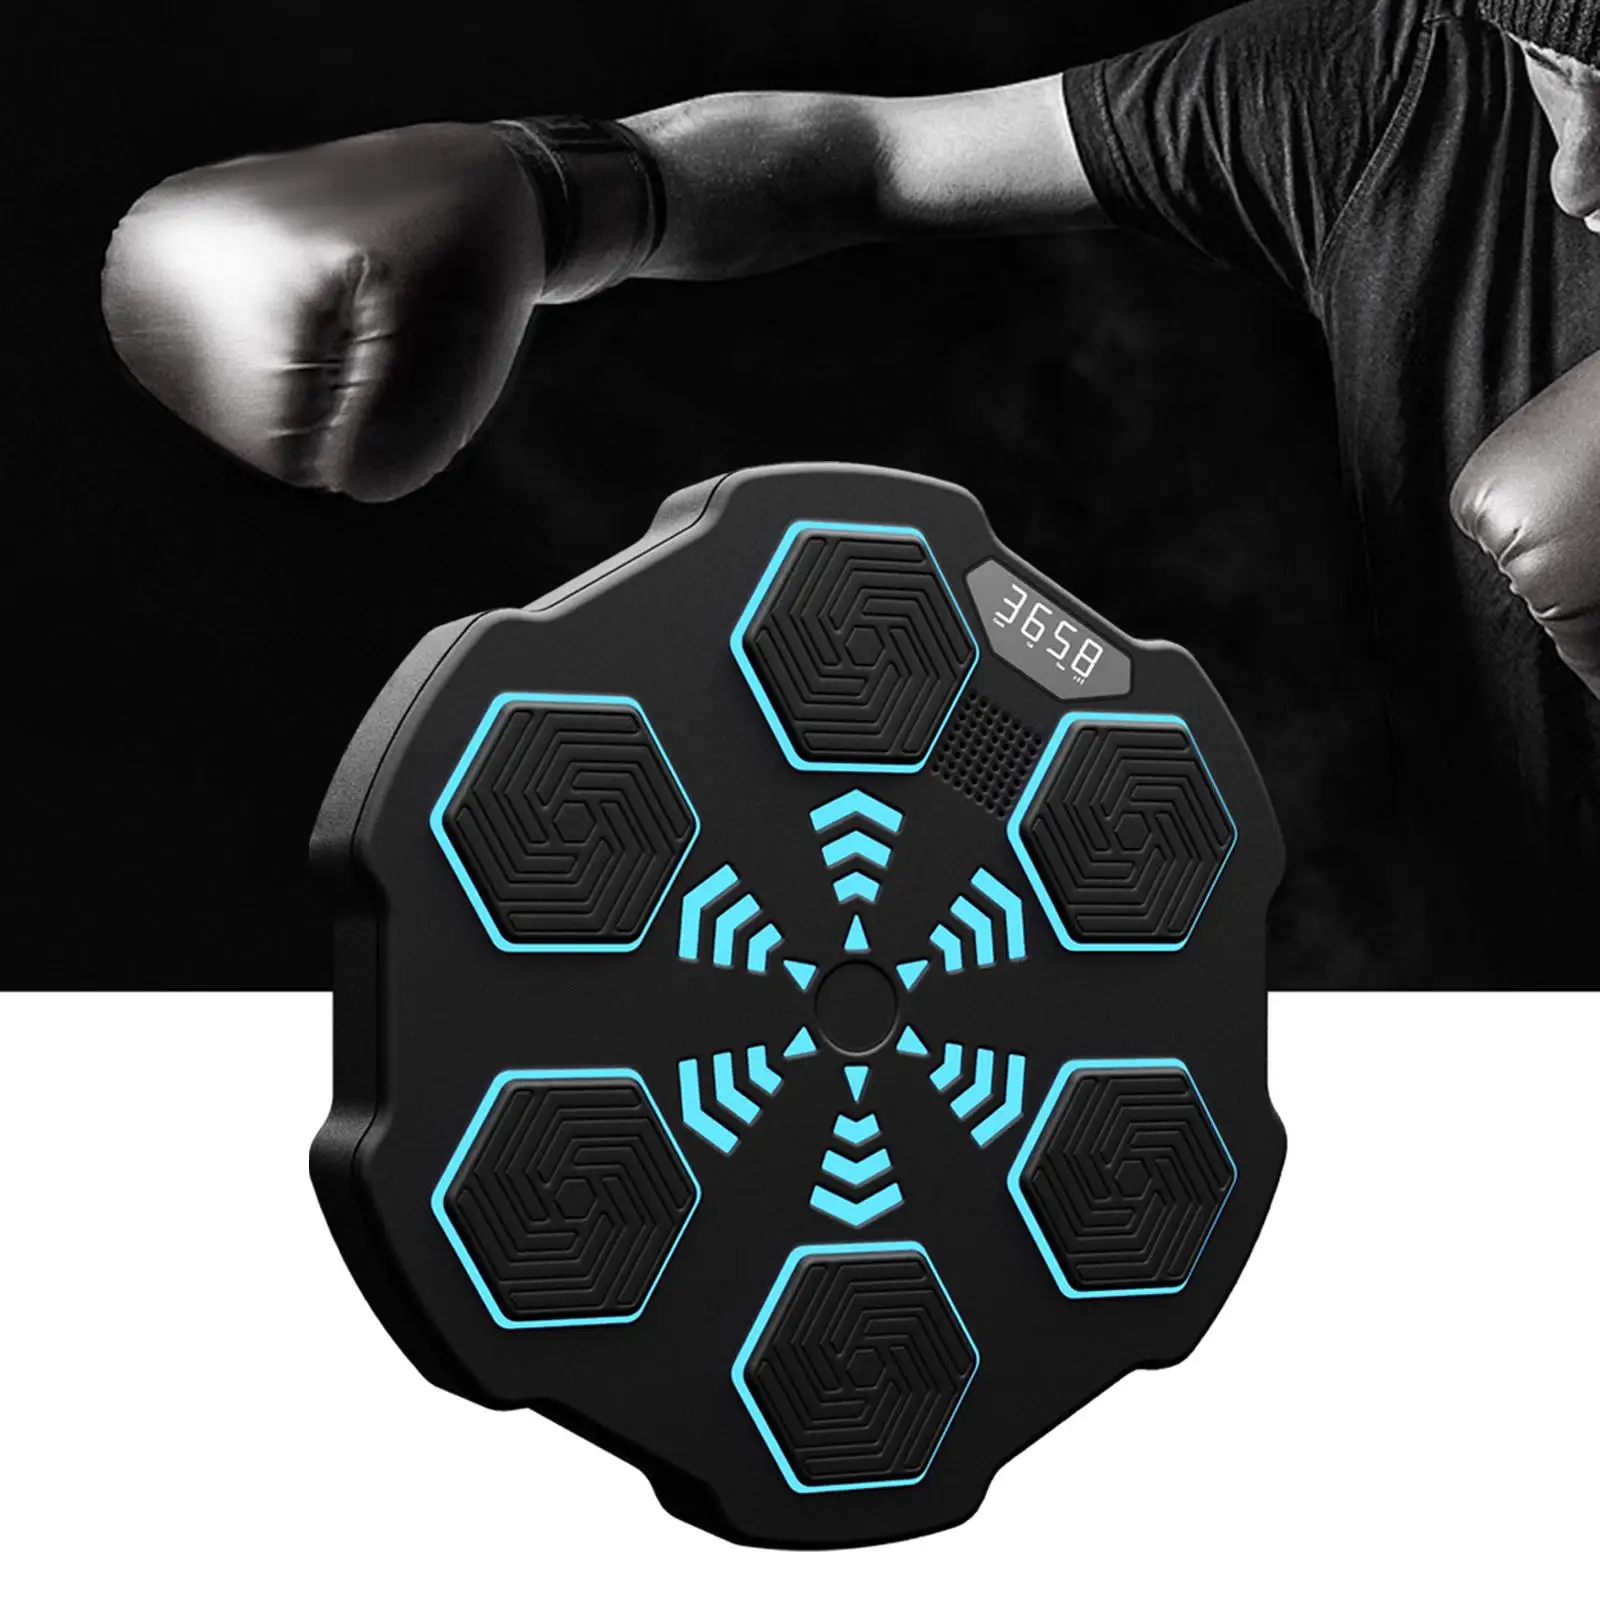 Music Boxing Training Machine Smart Electronic Wall Target for Game Exercise